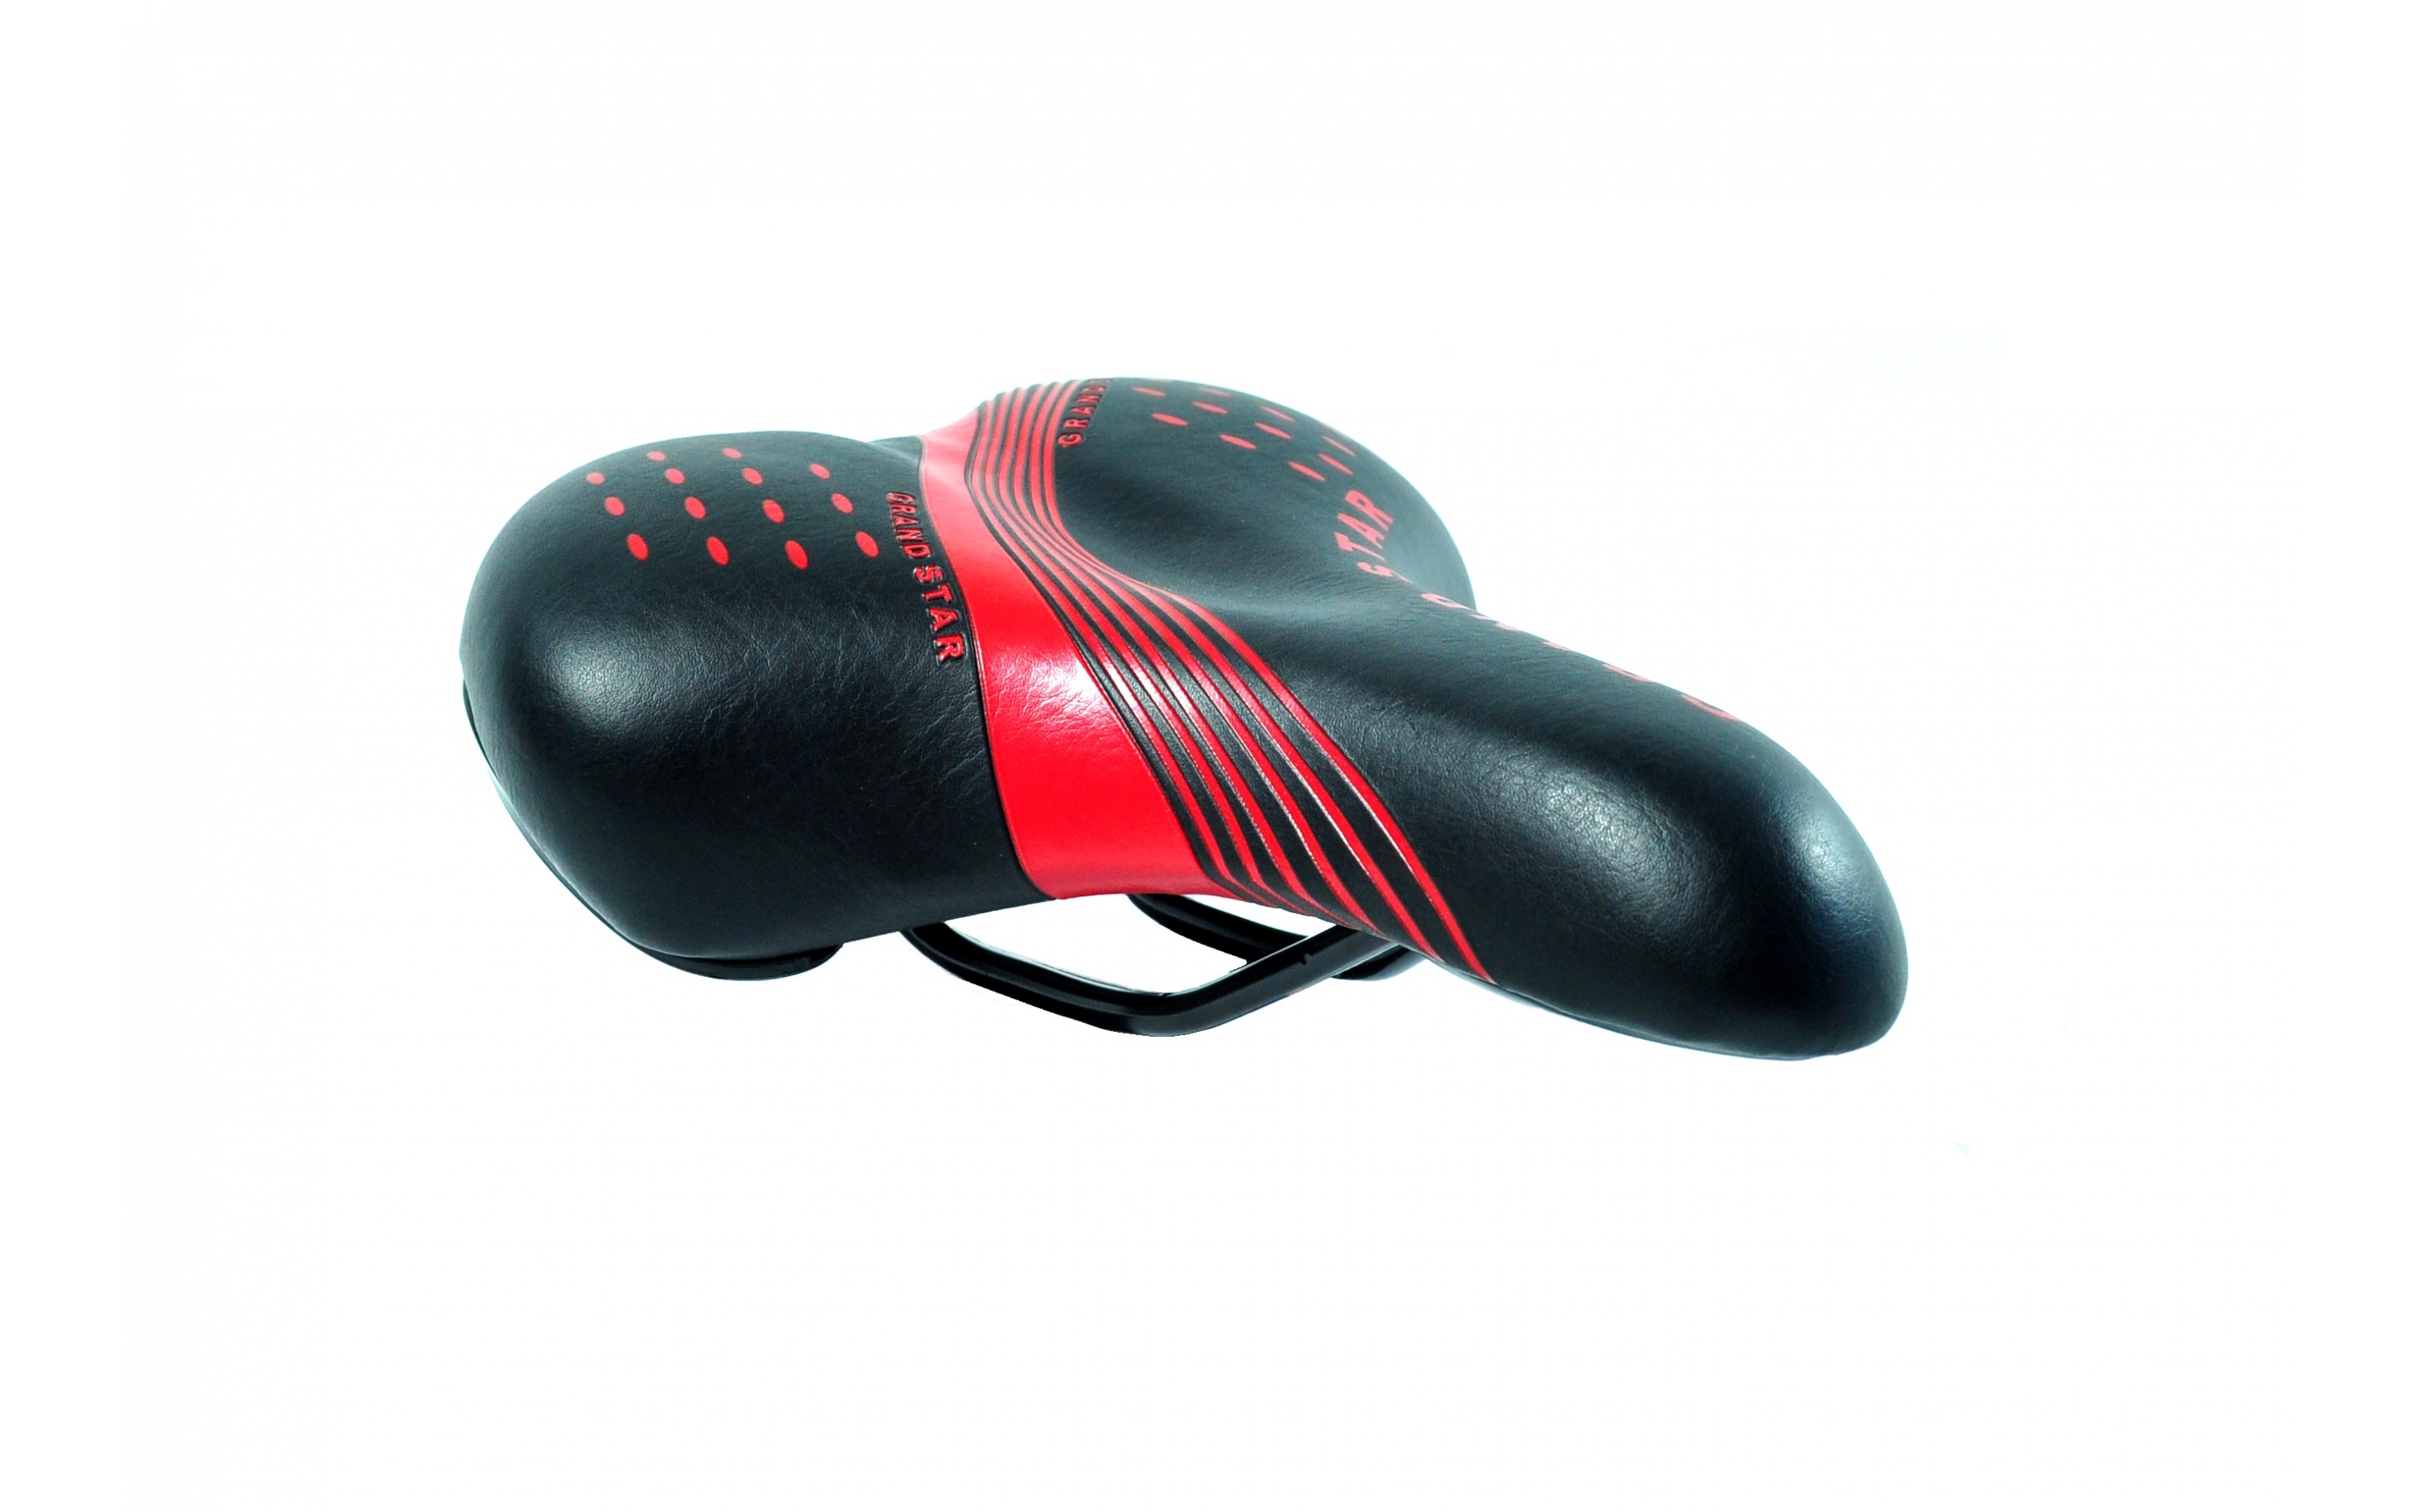  Saddle Grand Star GS-1055SED without lock, black and red